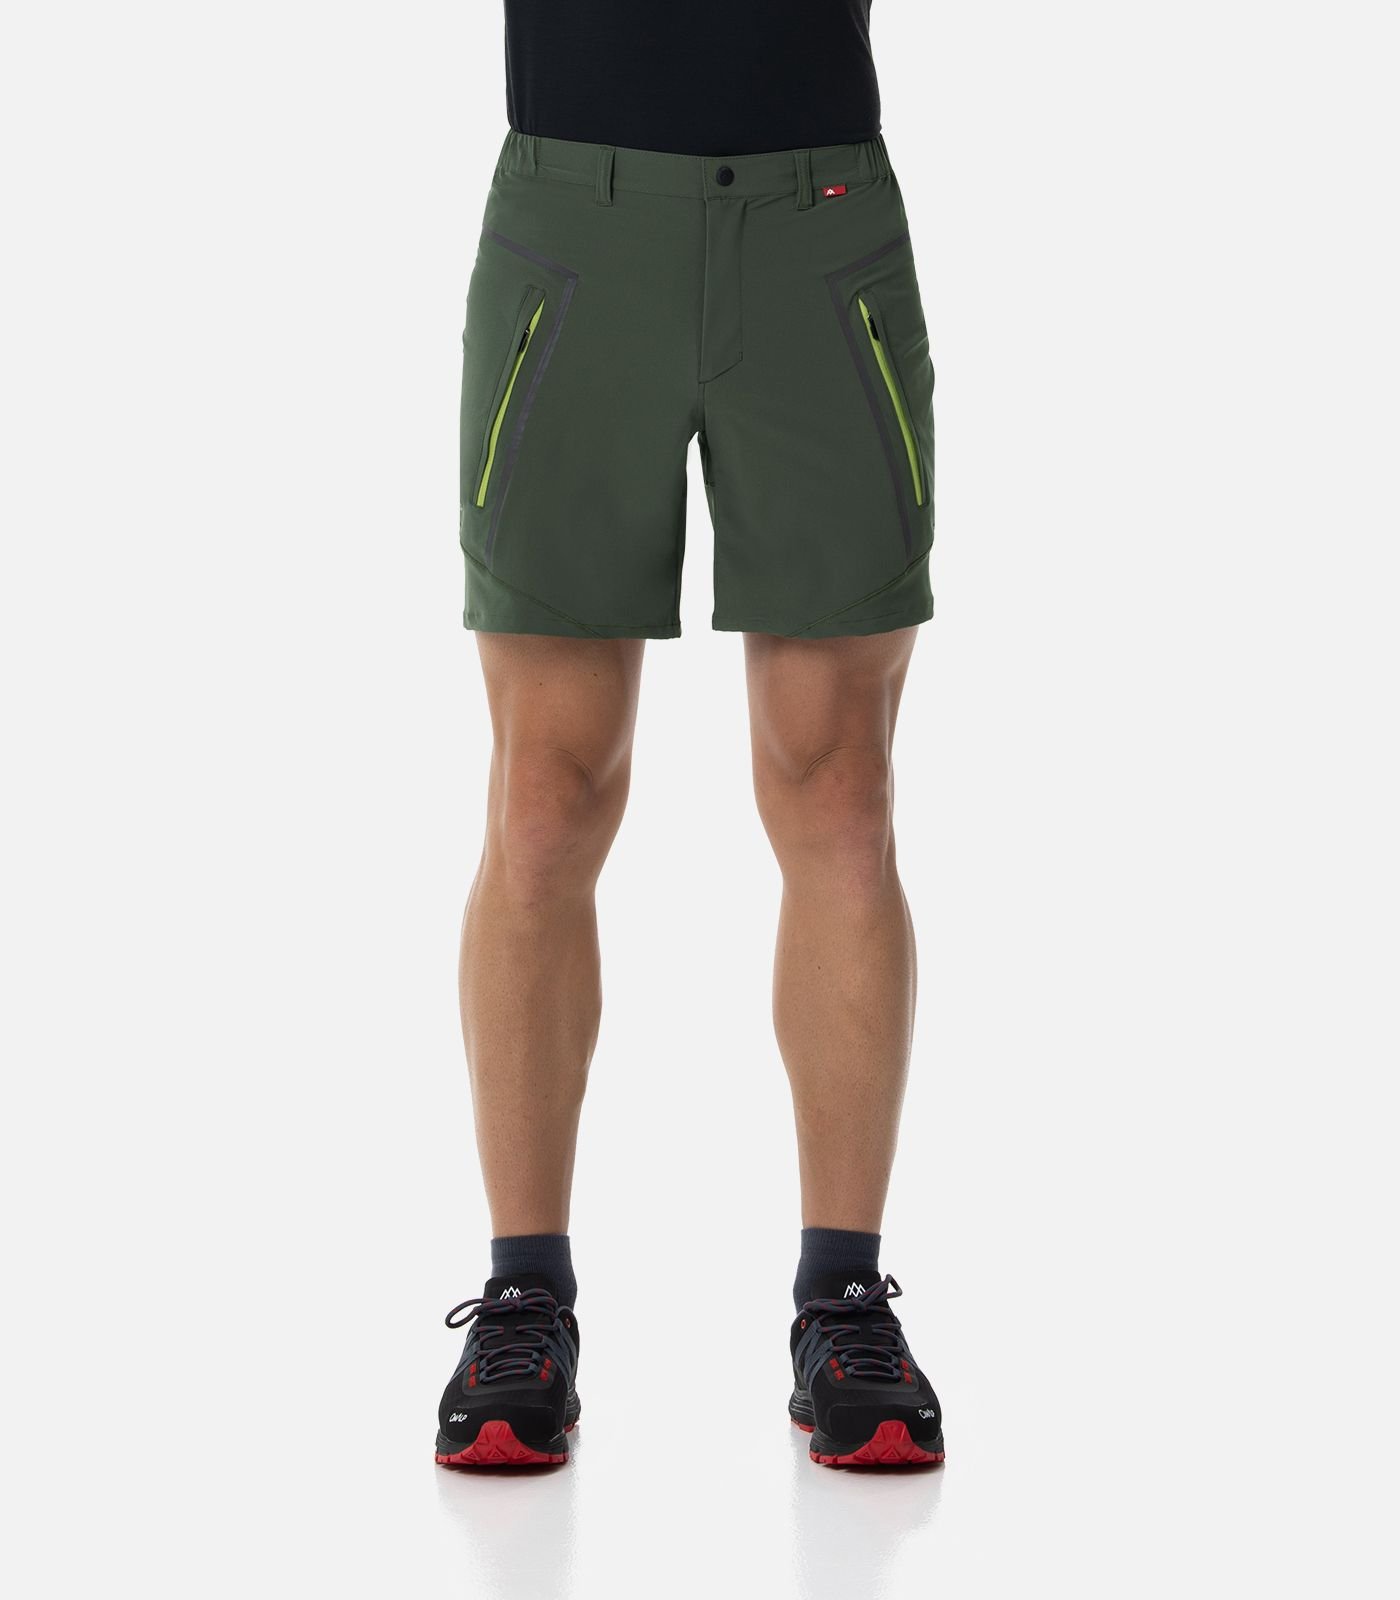 Highly stretchable & Ultralight Shorts